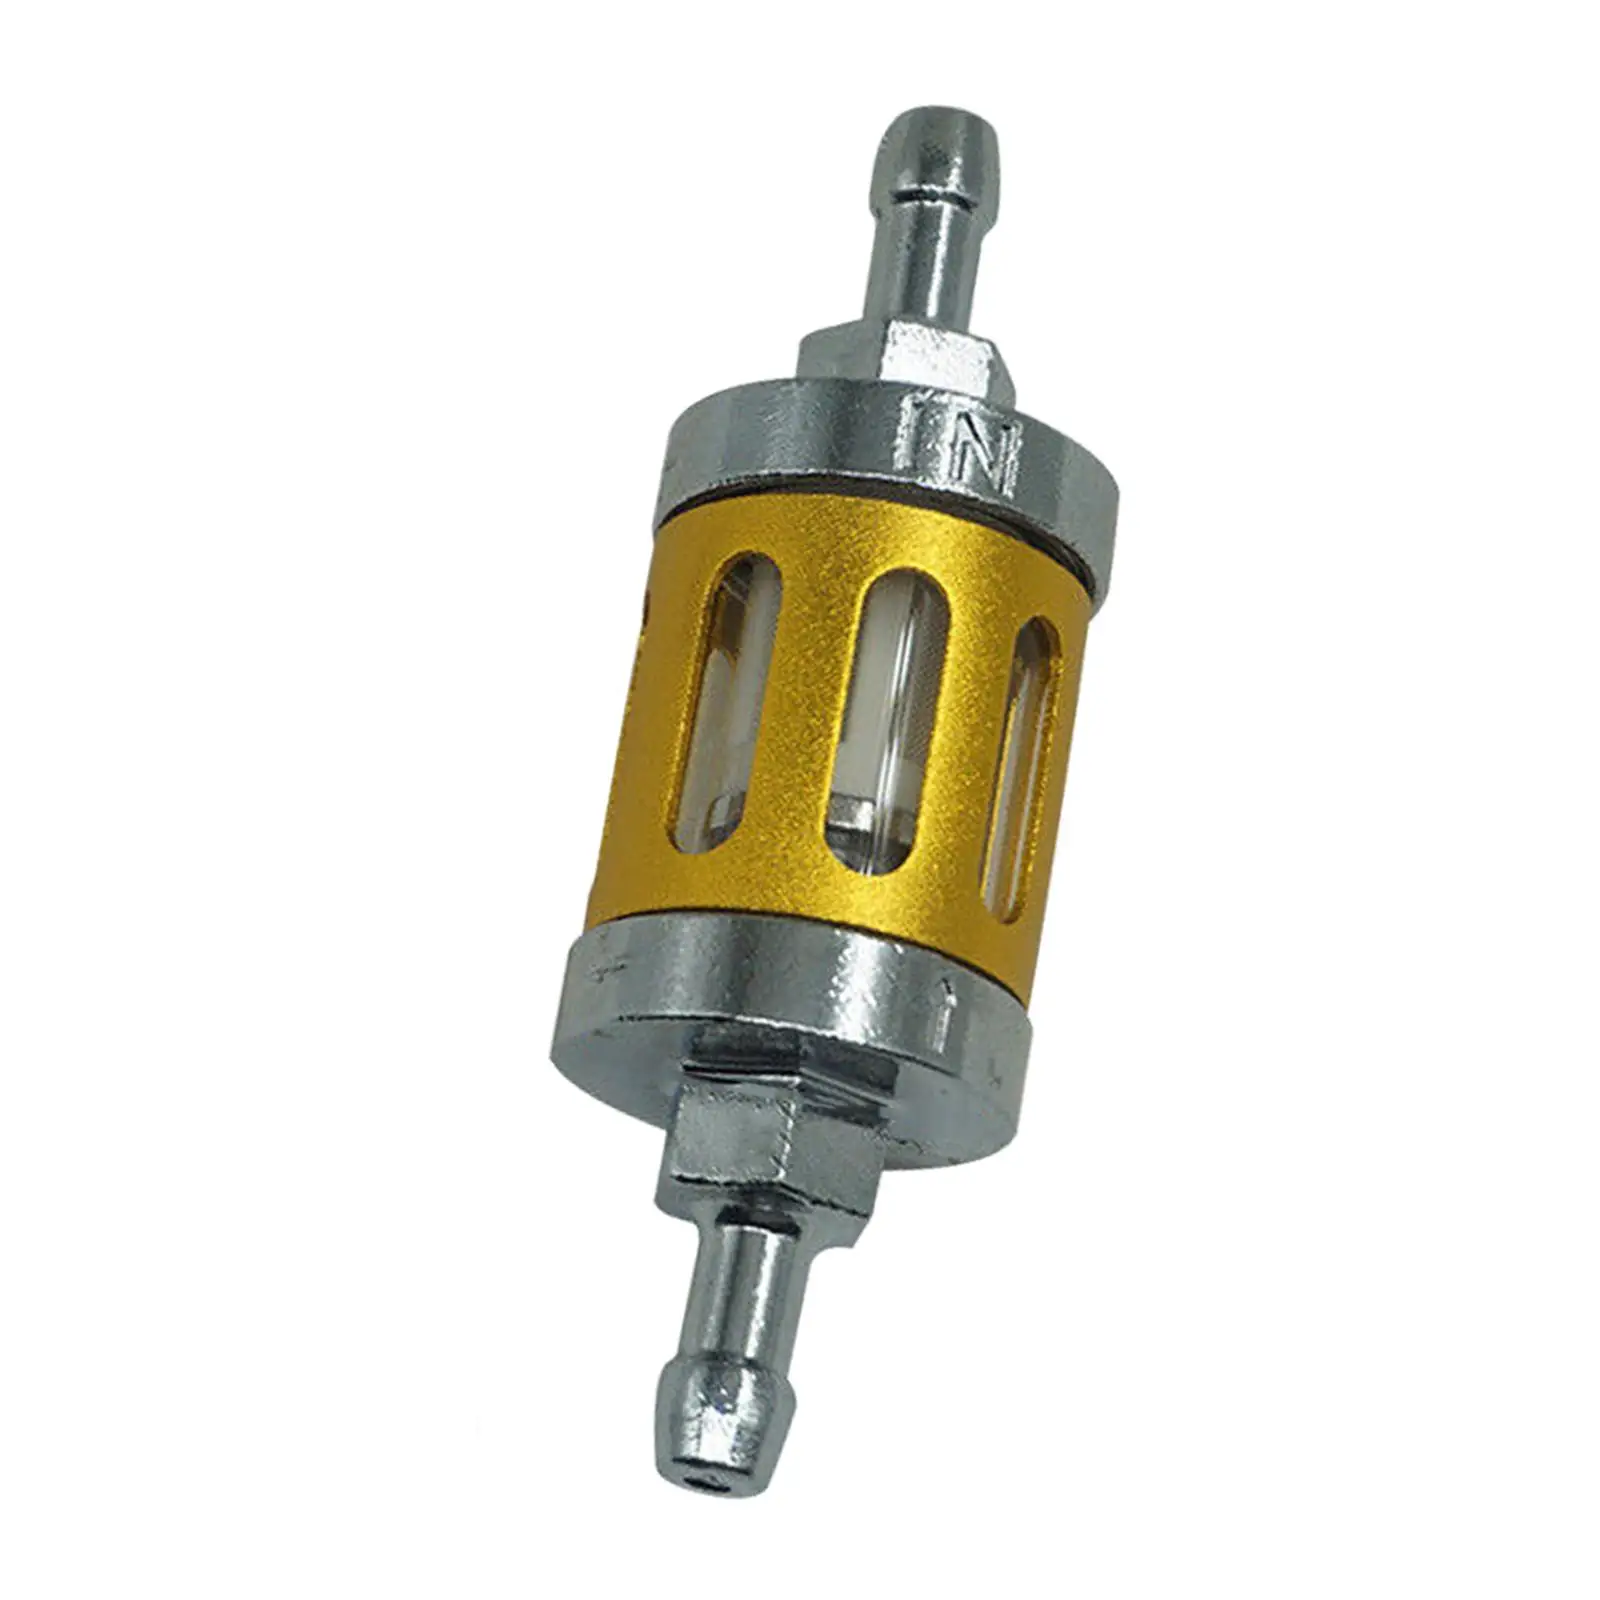 Motorcycle Fuel Filter Gasoline Oil Filter Universal Easily Install Fast Filtering Speed Precision Casting CNC Aluminum Replaces